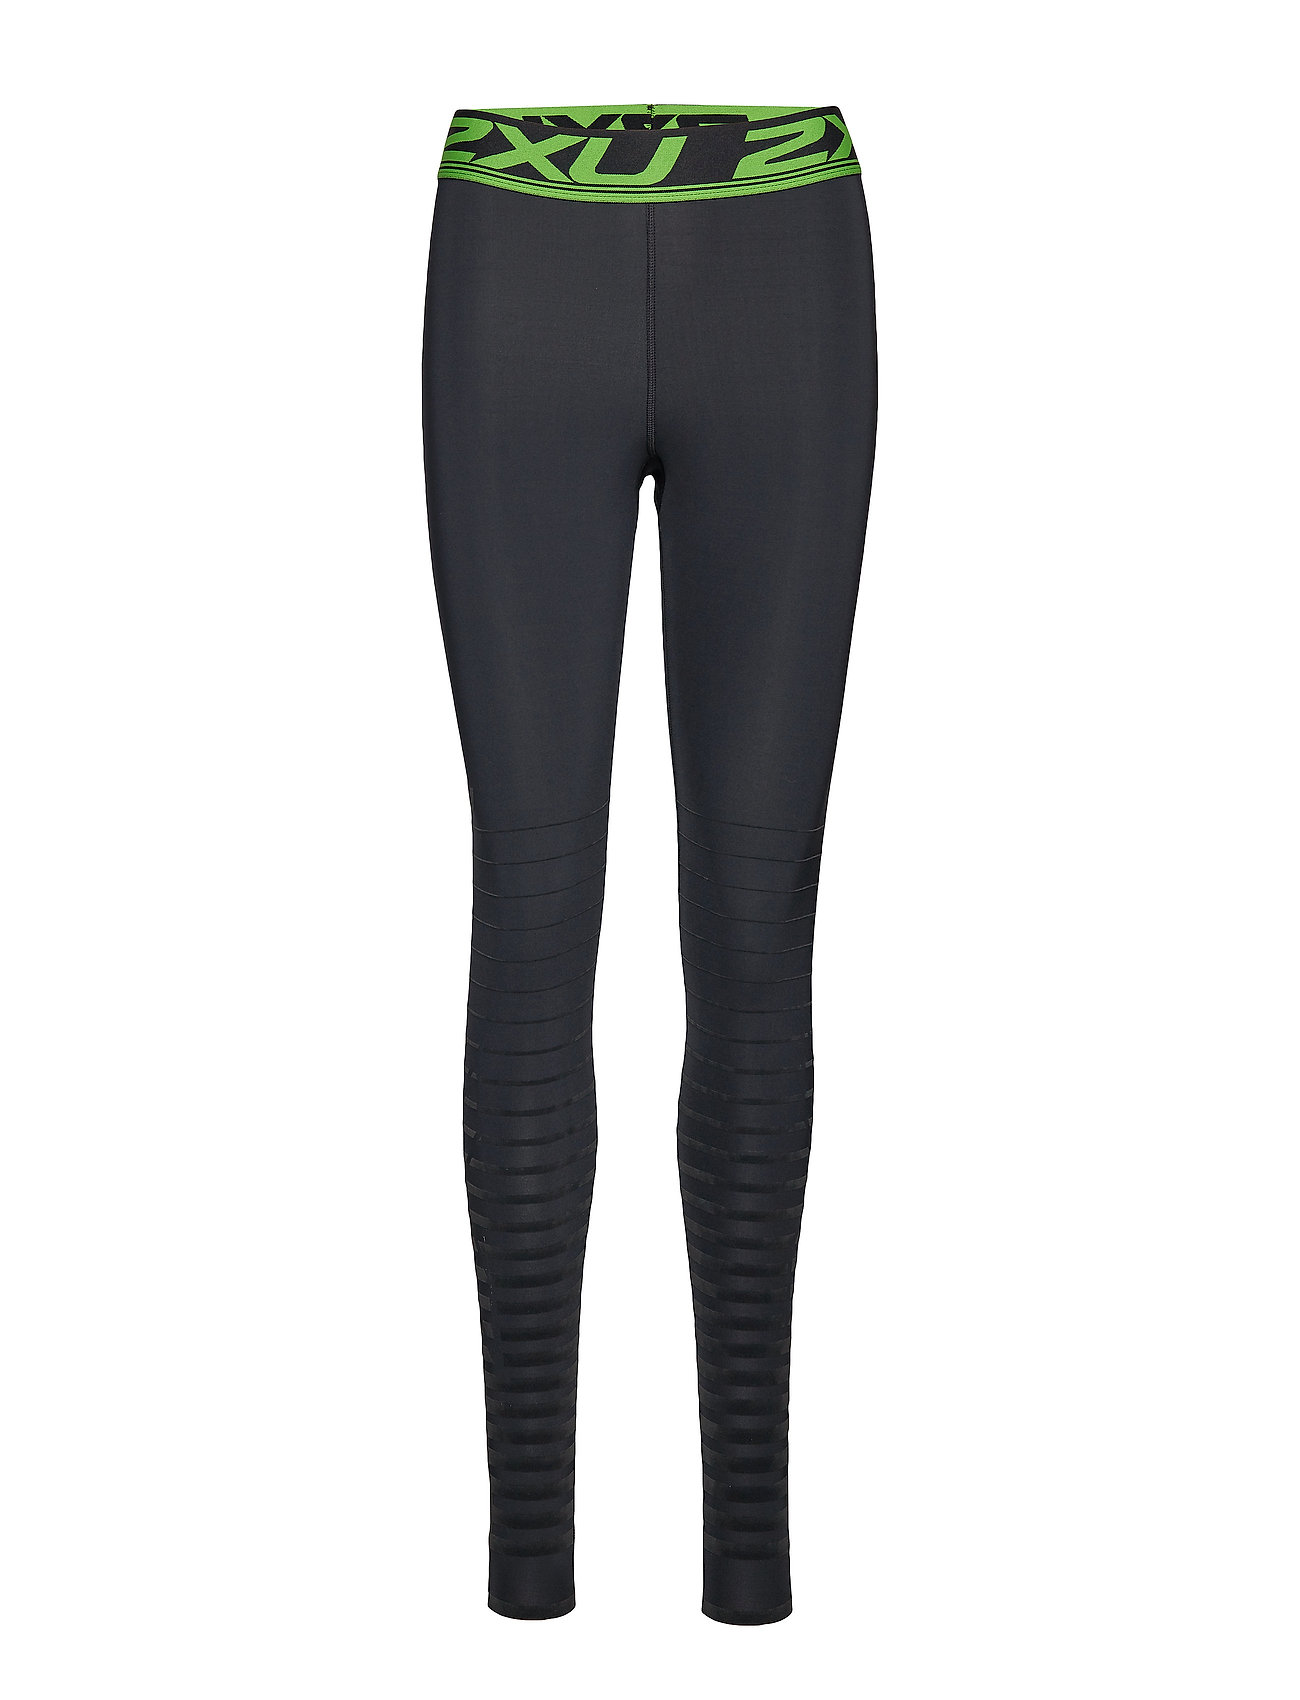 2XU Power Recovery Comp Tights 